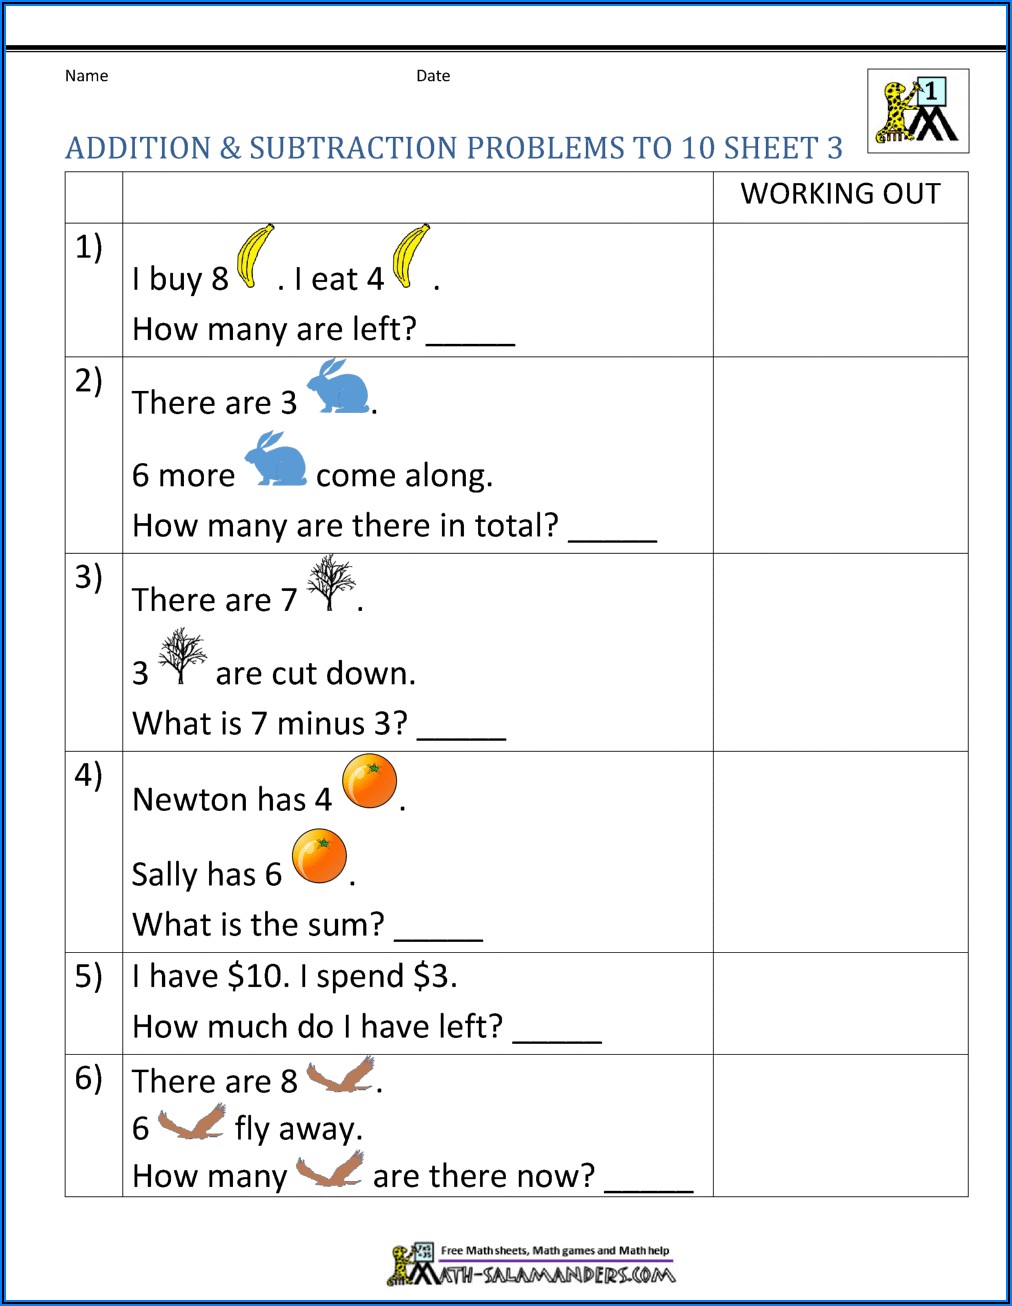 Worksheet On Word Problems On Addition And Subtraction For Grade 1